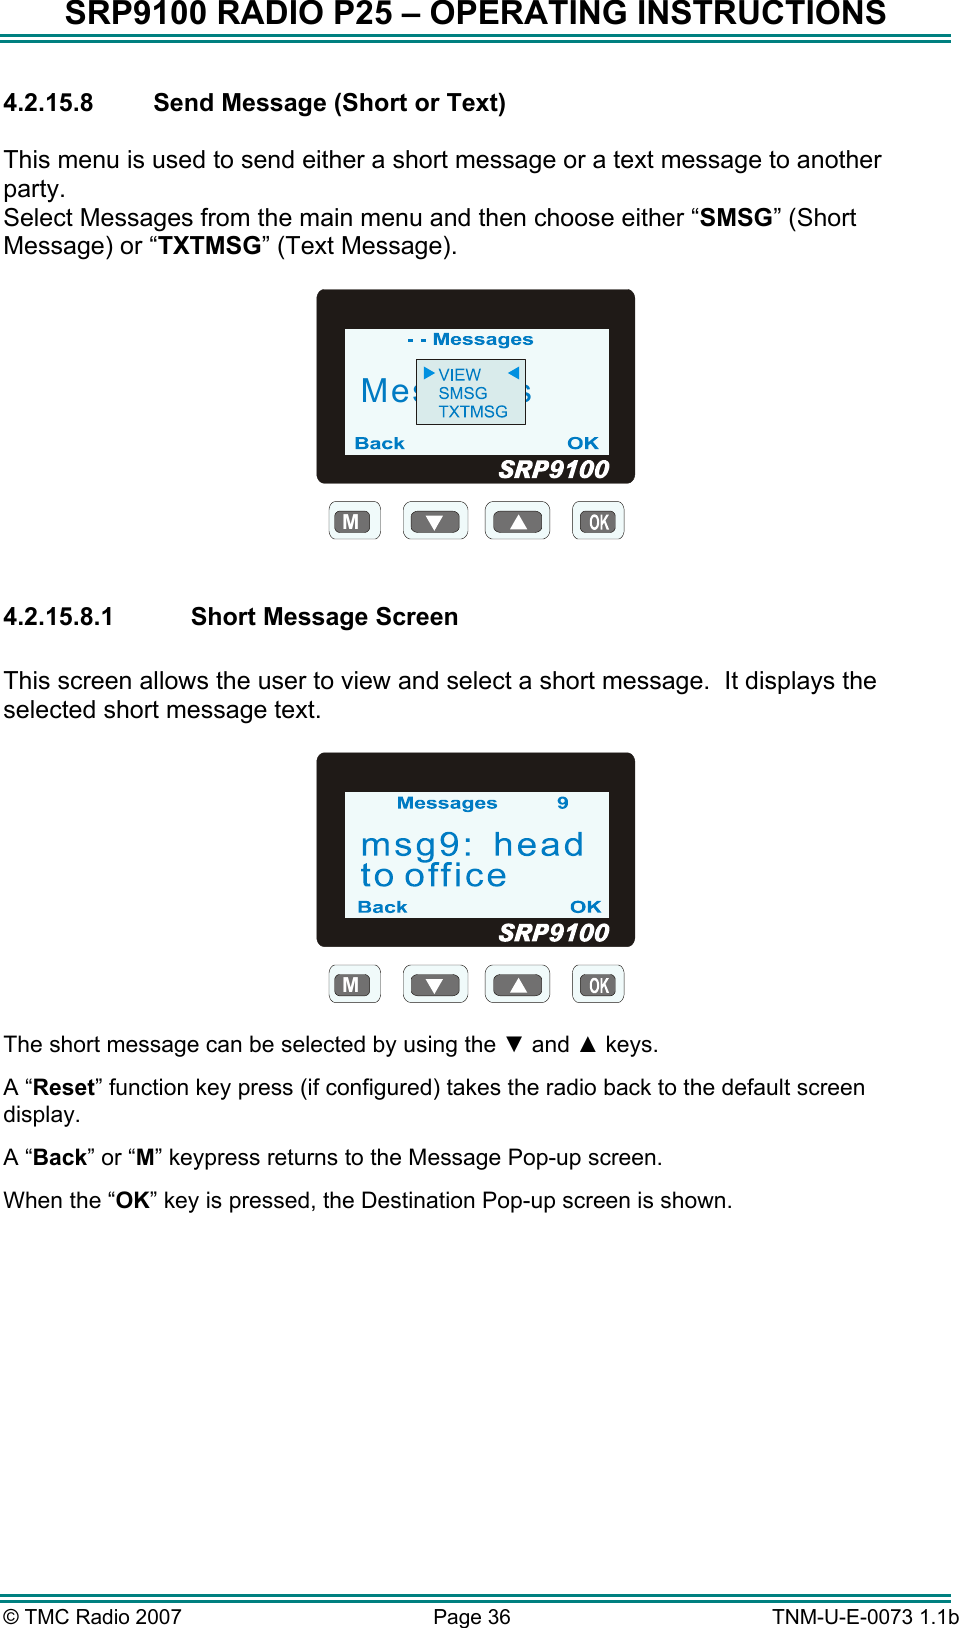 SRP9100 RADIO P25 – OPERATING INSTRUCTIONS 4.2.15.8  Send Message (Short or Text)  This menu is used to send either a short message or a text message to another party.    Select Messages from the main menu and then choose either “SMSG” (Short Message) or “TXTMSG” (Text Message).  MMessages  4.2.15.8.1  Short Message Screen  This screen allows the user to view and select a short message.  It displays the selected short message text.  M  The short message can be selected by using the ▼ and ▲ keys. A “Reset” function key press (if configured) takes the radio back to the default screen display. A “Back” or “M” keypress returns to the Message Pop-up screen.  When the “OK” key is pressed, the Destination Pop-up screen is shown.  © TMC Radio 2007  Page 36   TNM-U-E-0073 1.1b 